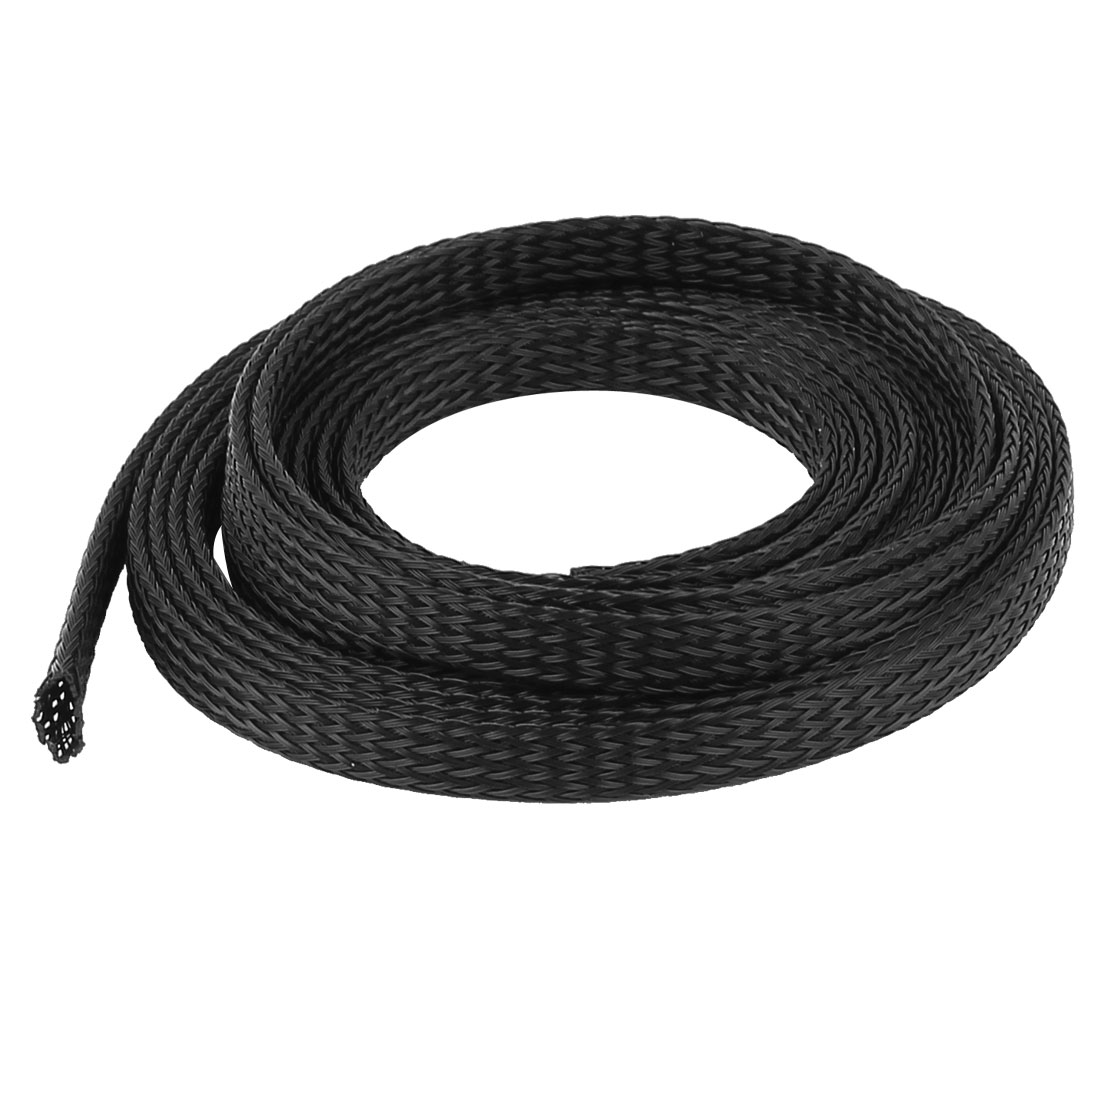 V0 Black and Gray Polyester PET Braided Sleeving